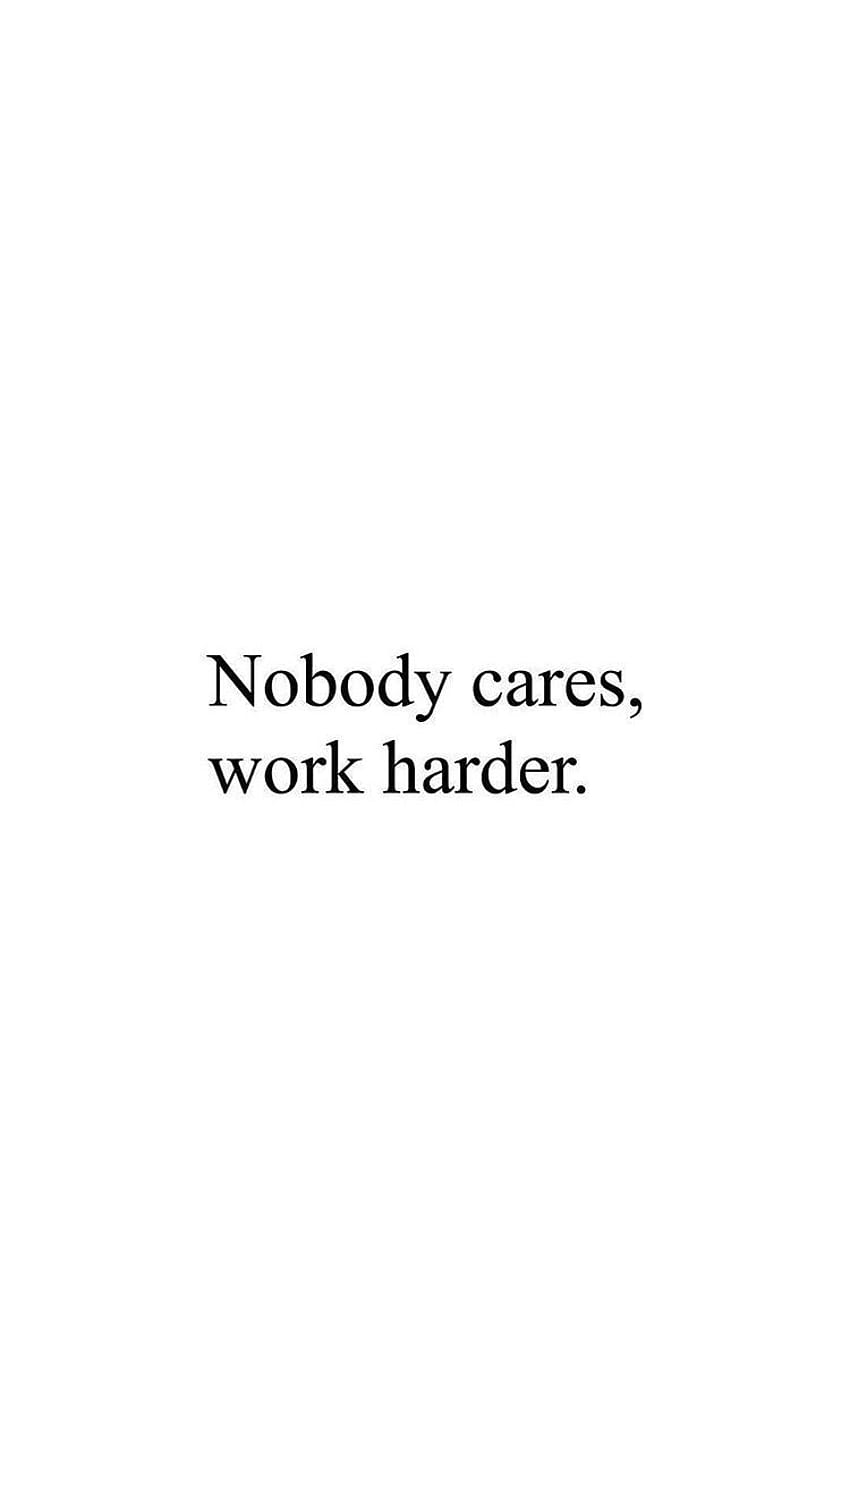 No one cares HD wallpapers  Pxfuel